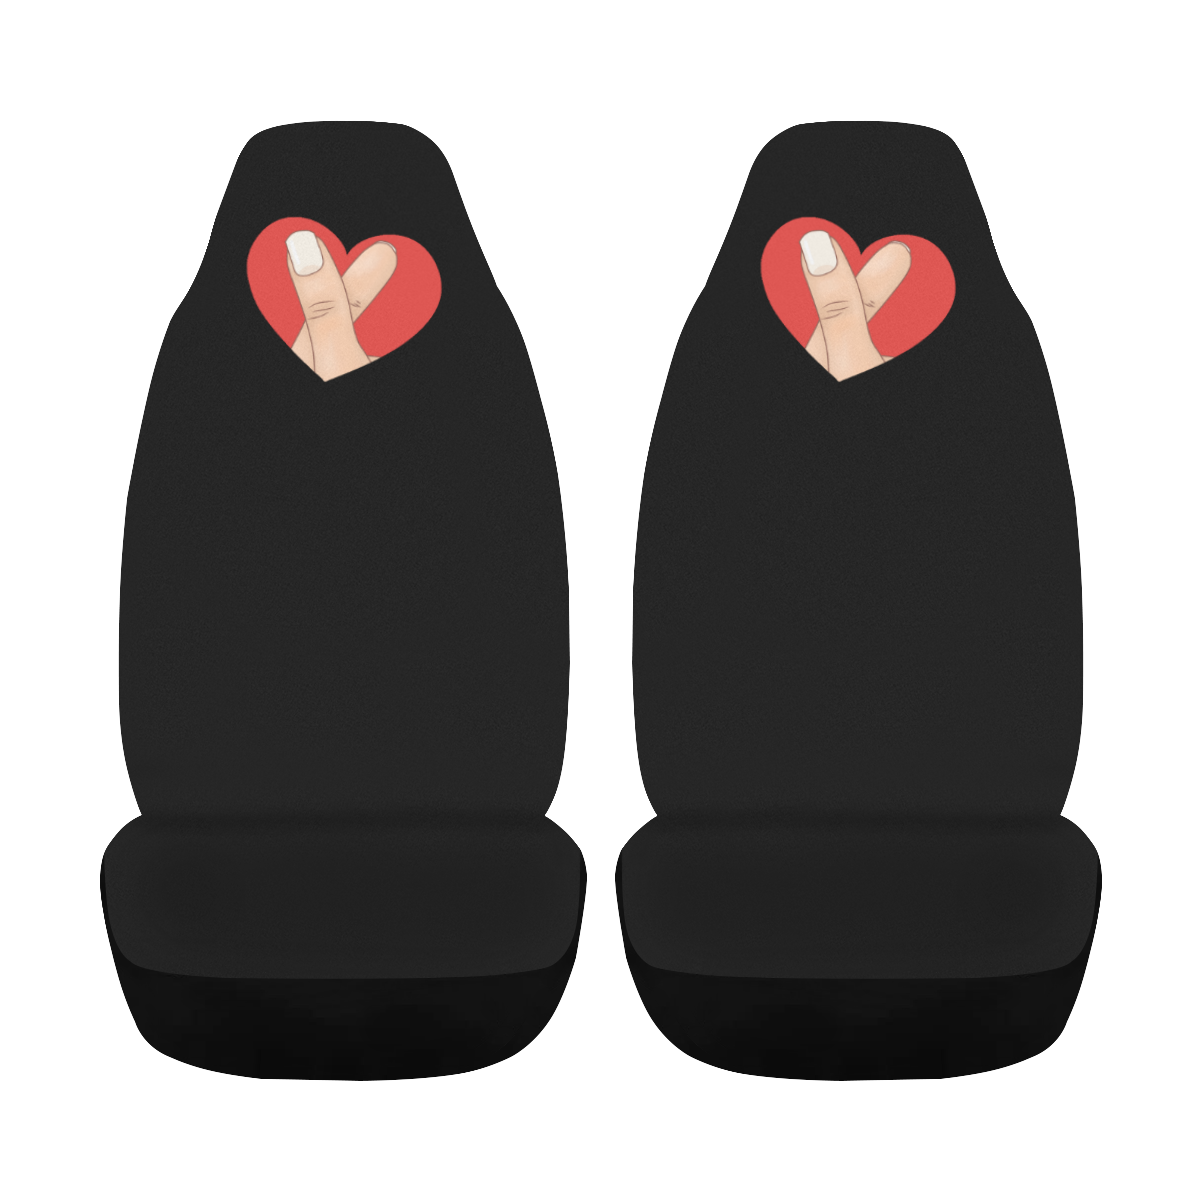 Red Heart Fingers on Black Car Seat Cover Airbag Compatible (Set of 2)